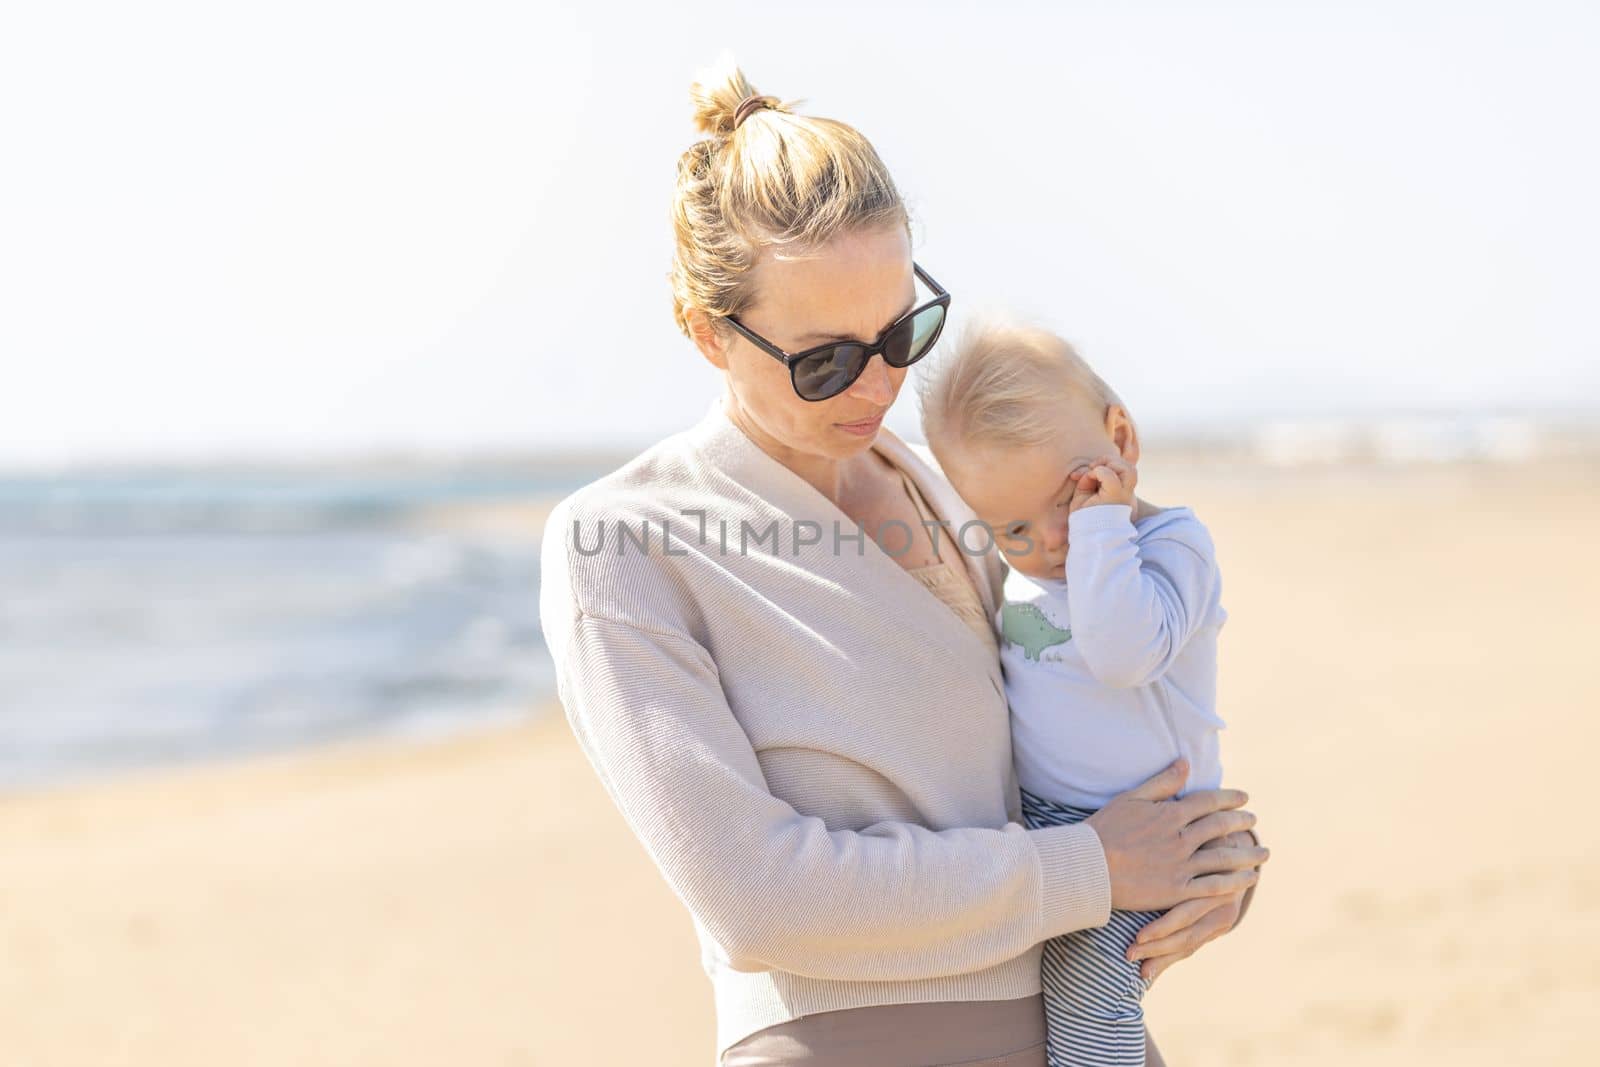 Mother holding and carrying his infant baby boy son on sandy beach enjoying summer vacationson on Lanzarote island, Spain. Family travel and vacations concept. by kasto